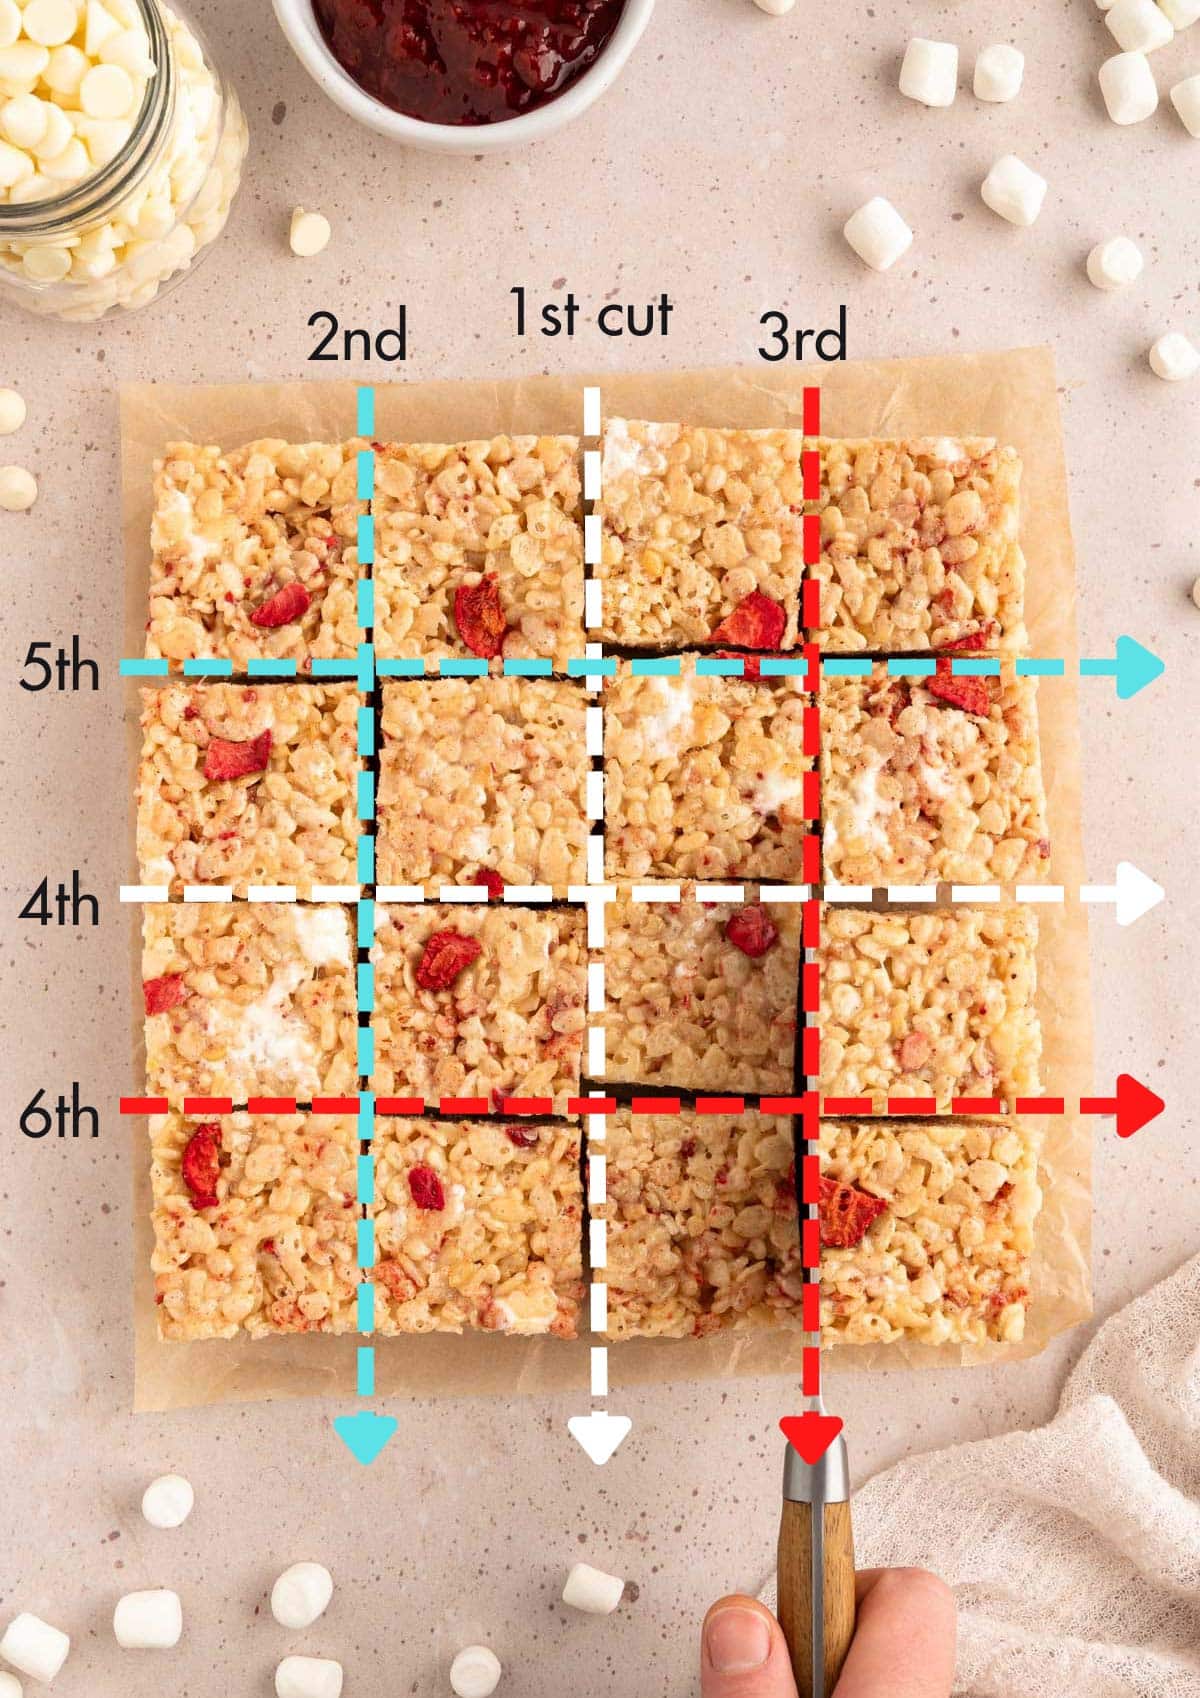 overhead photo showing the cutting order for 16 krispie treats from an 8 inch square pan. White, red, and turquoise arrows overlay the photo with text captions for the 1st through 6th cuts.